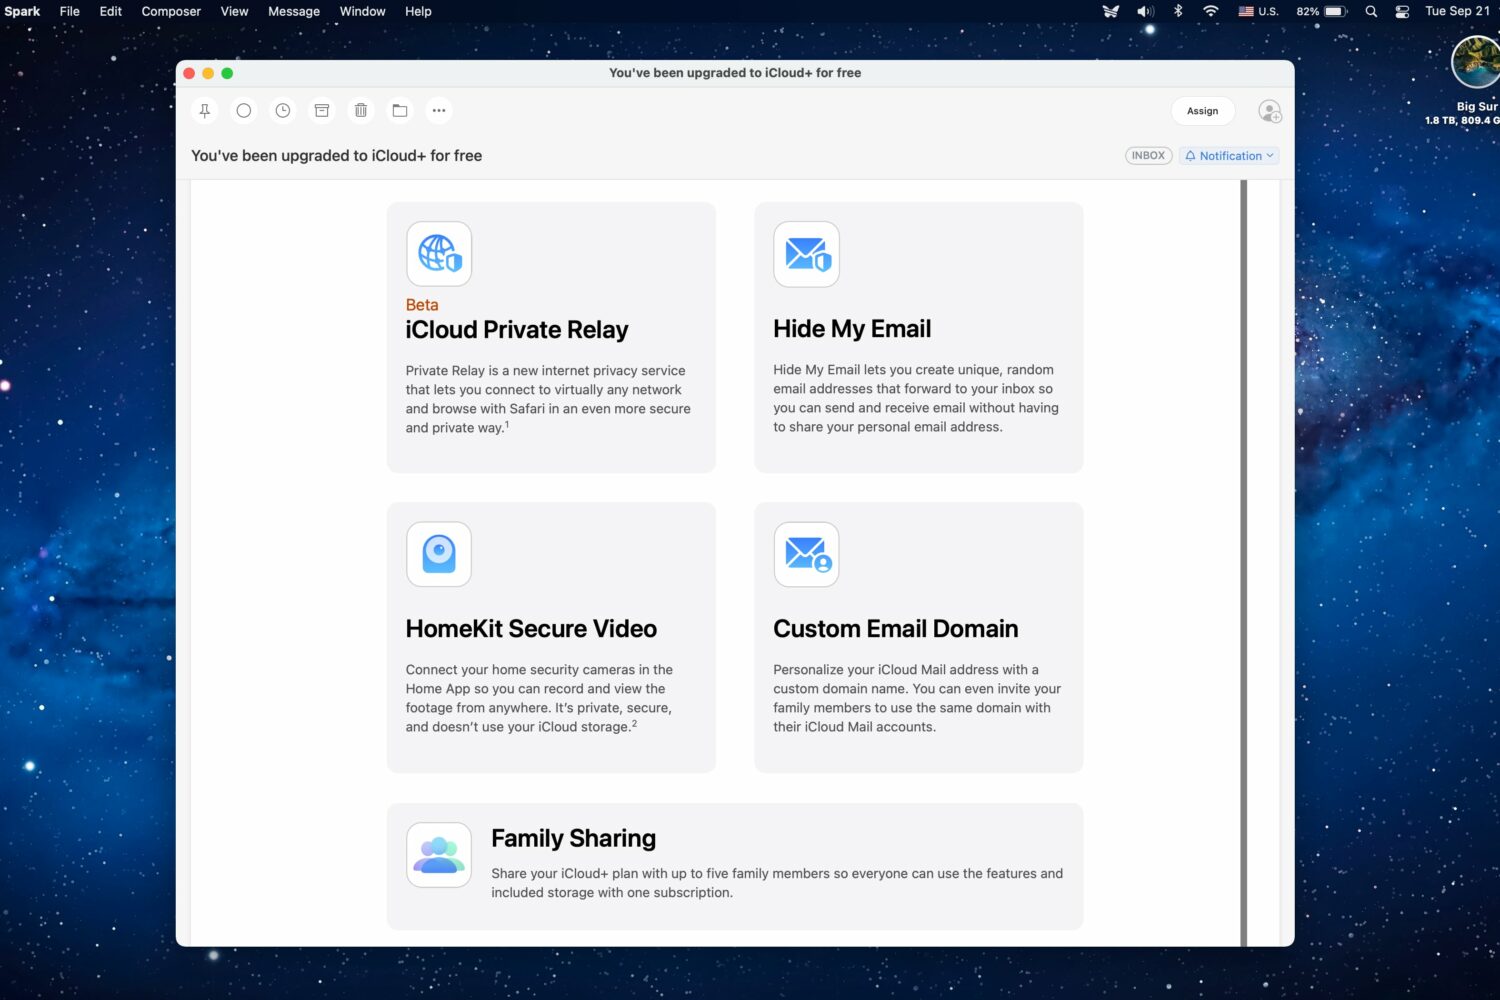 A macOS screenshot showing an Apple Mail message promoting the new Hide My Email and Custom Email Domains features